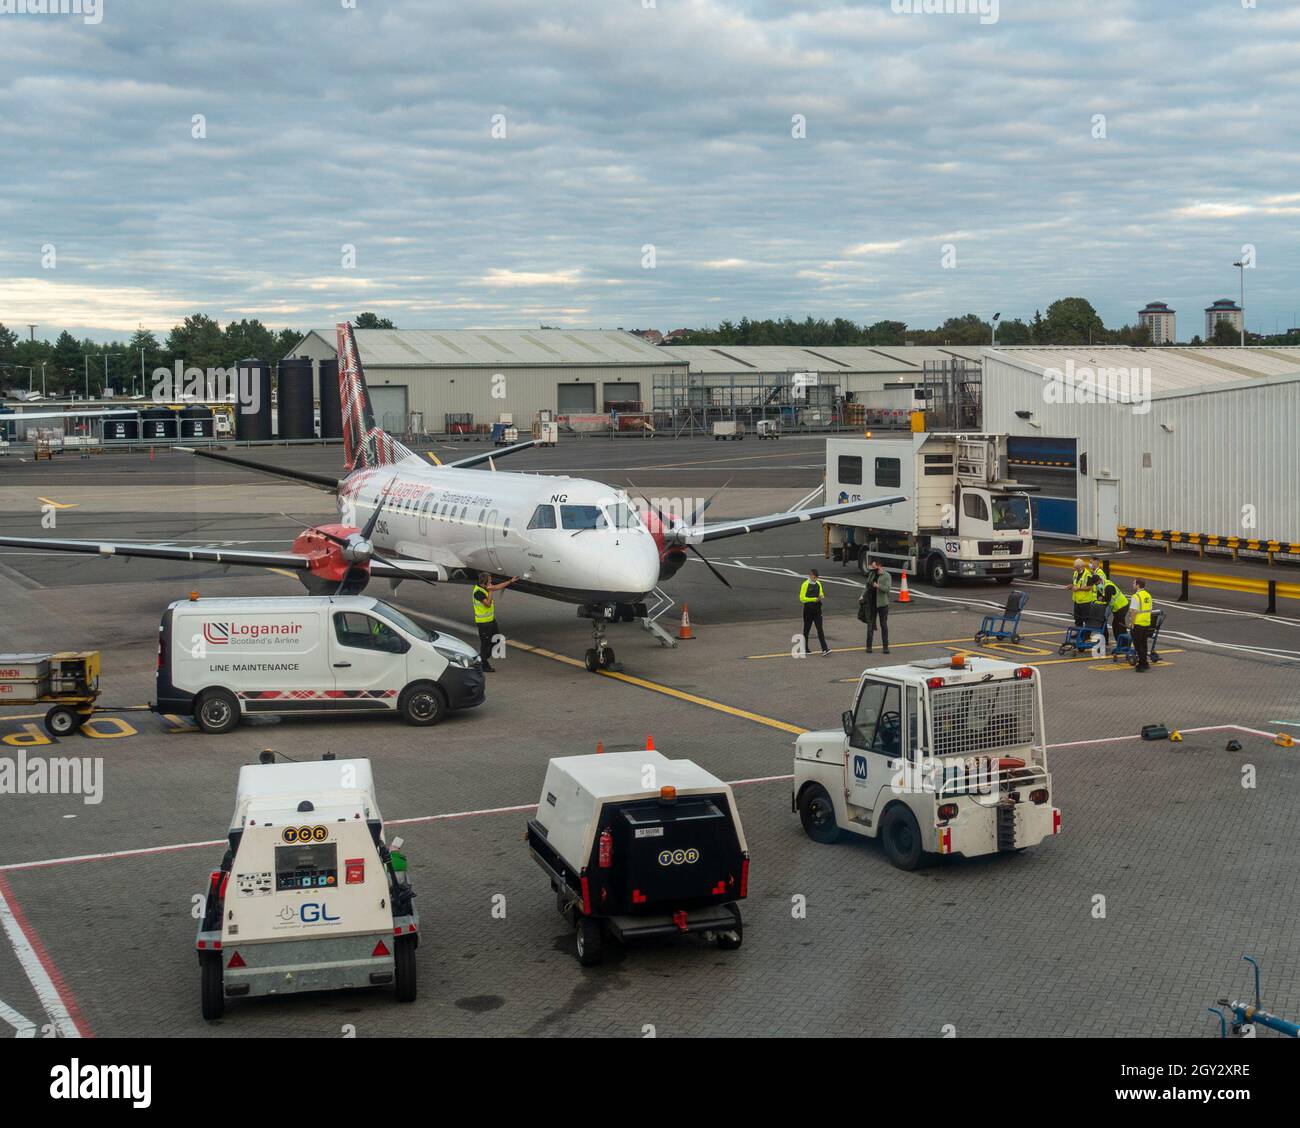 Support vehicles and staff surrounding a Loganair Saab 340B turboprop plane reg.  G-LGNG, which has just landed at Glasgow Airport, Scotland. Stock Photo